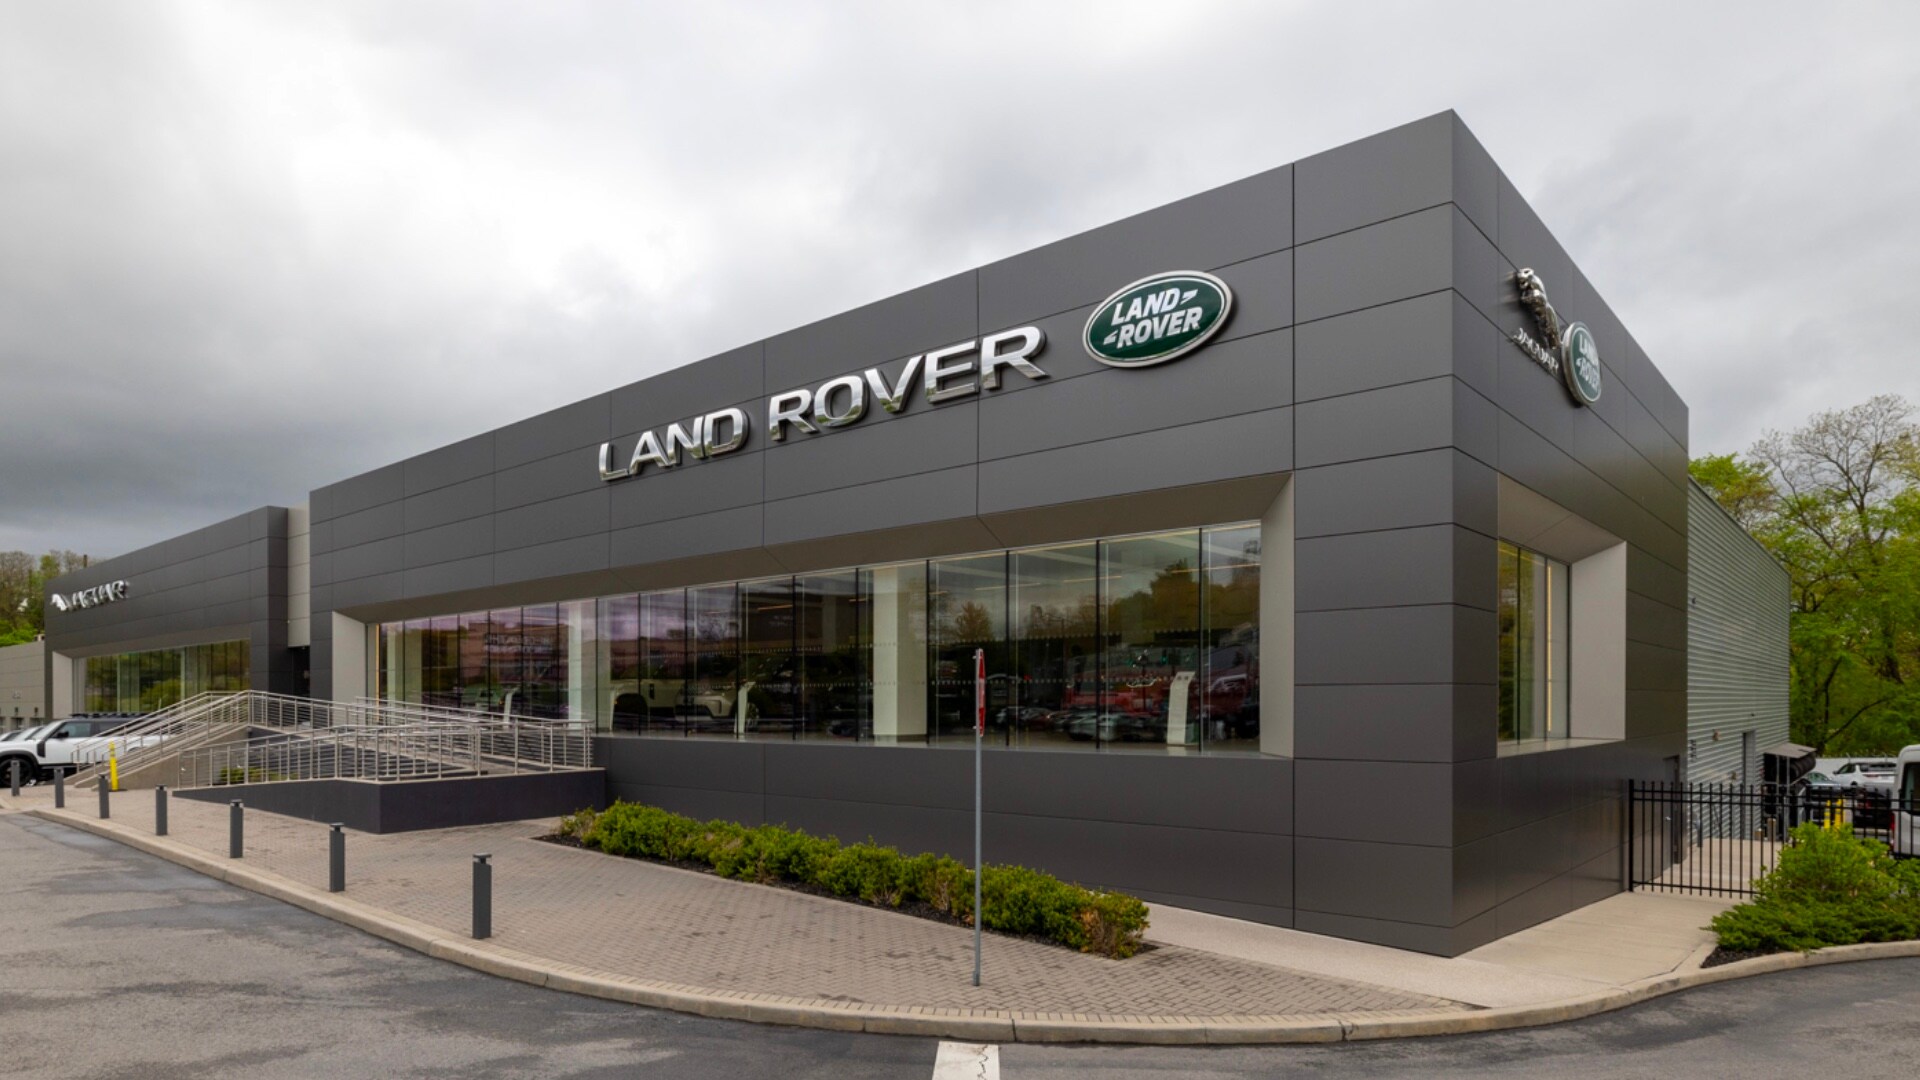 Grey Land Rover White Plains dealership building with a cloudy sky in the background. Vehicles can be seen inside through the large glass windows, and outside in the lot. A large LR logo and sign can be seen on the building.